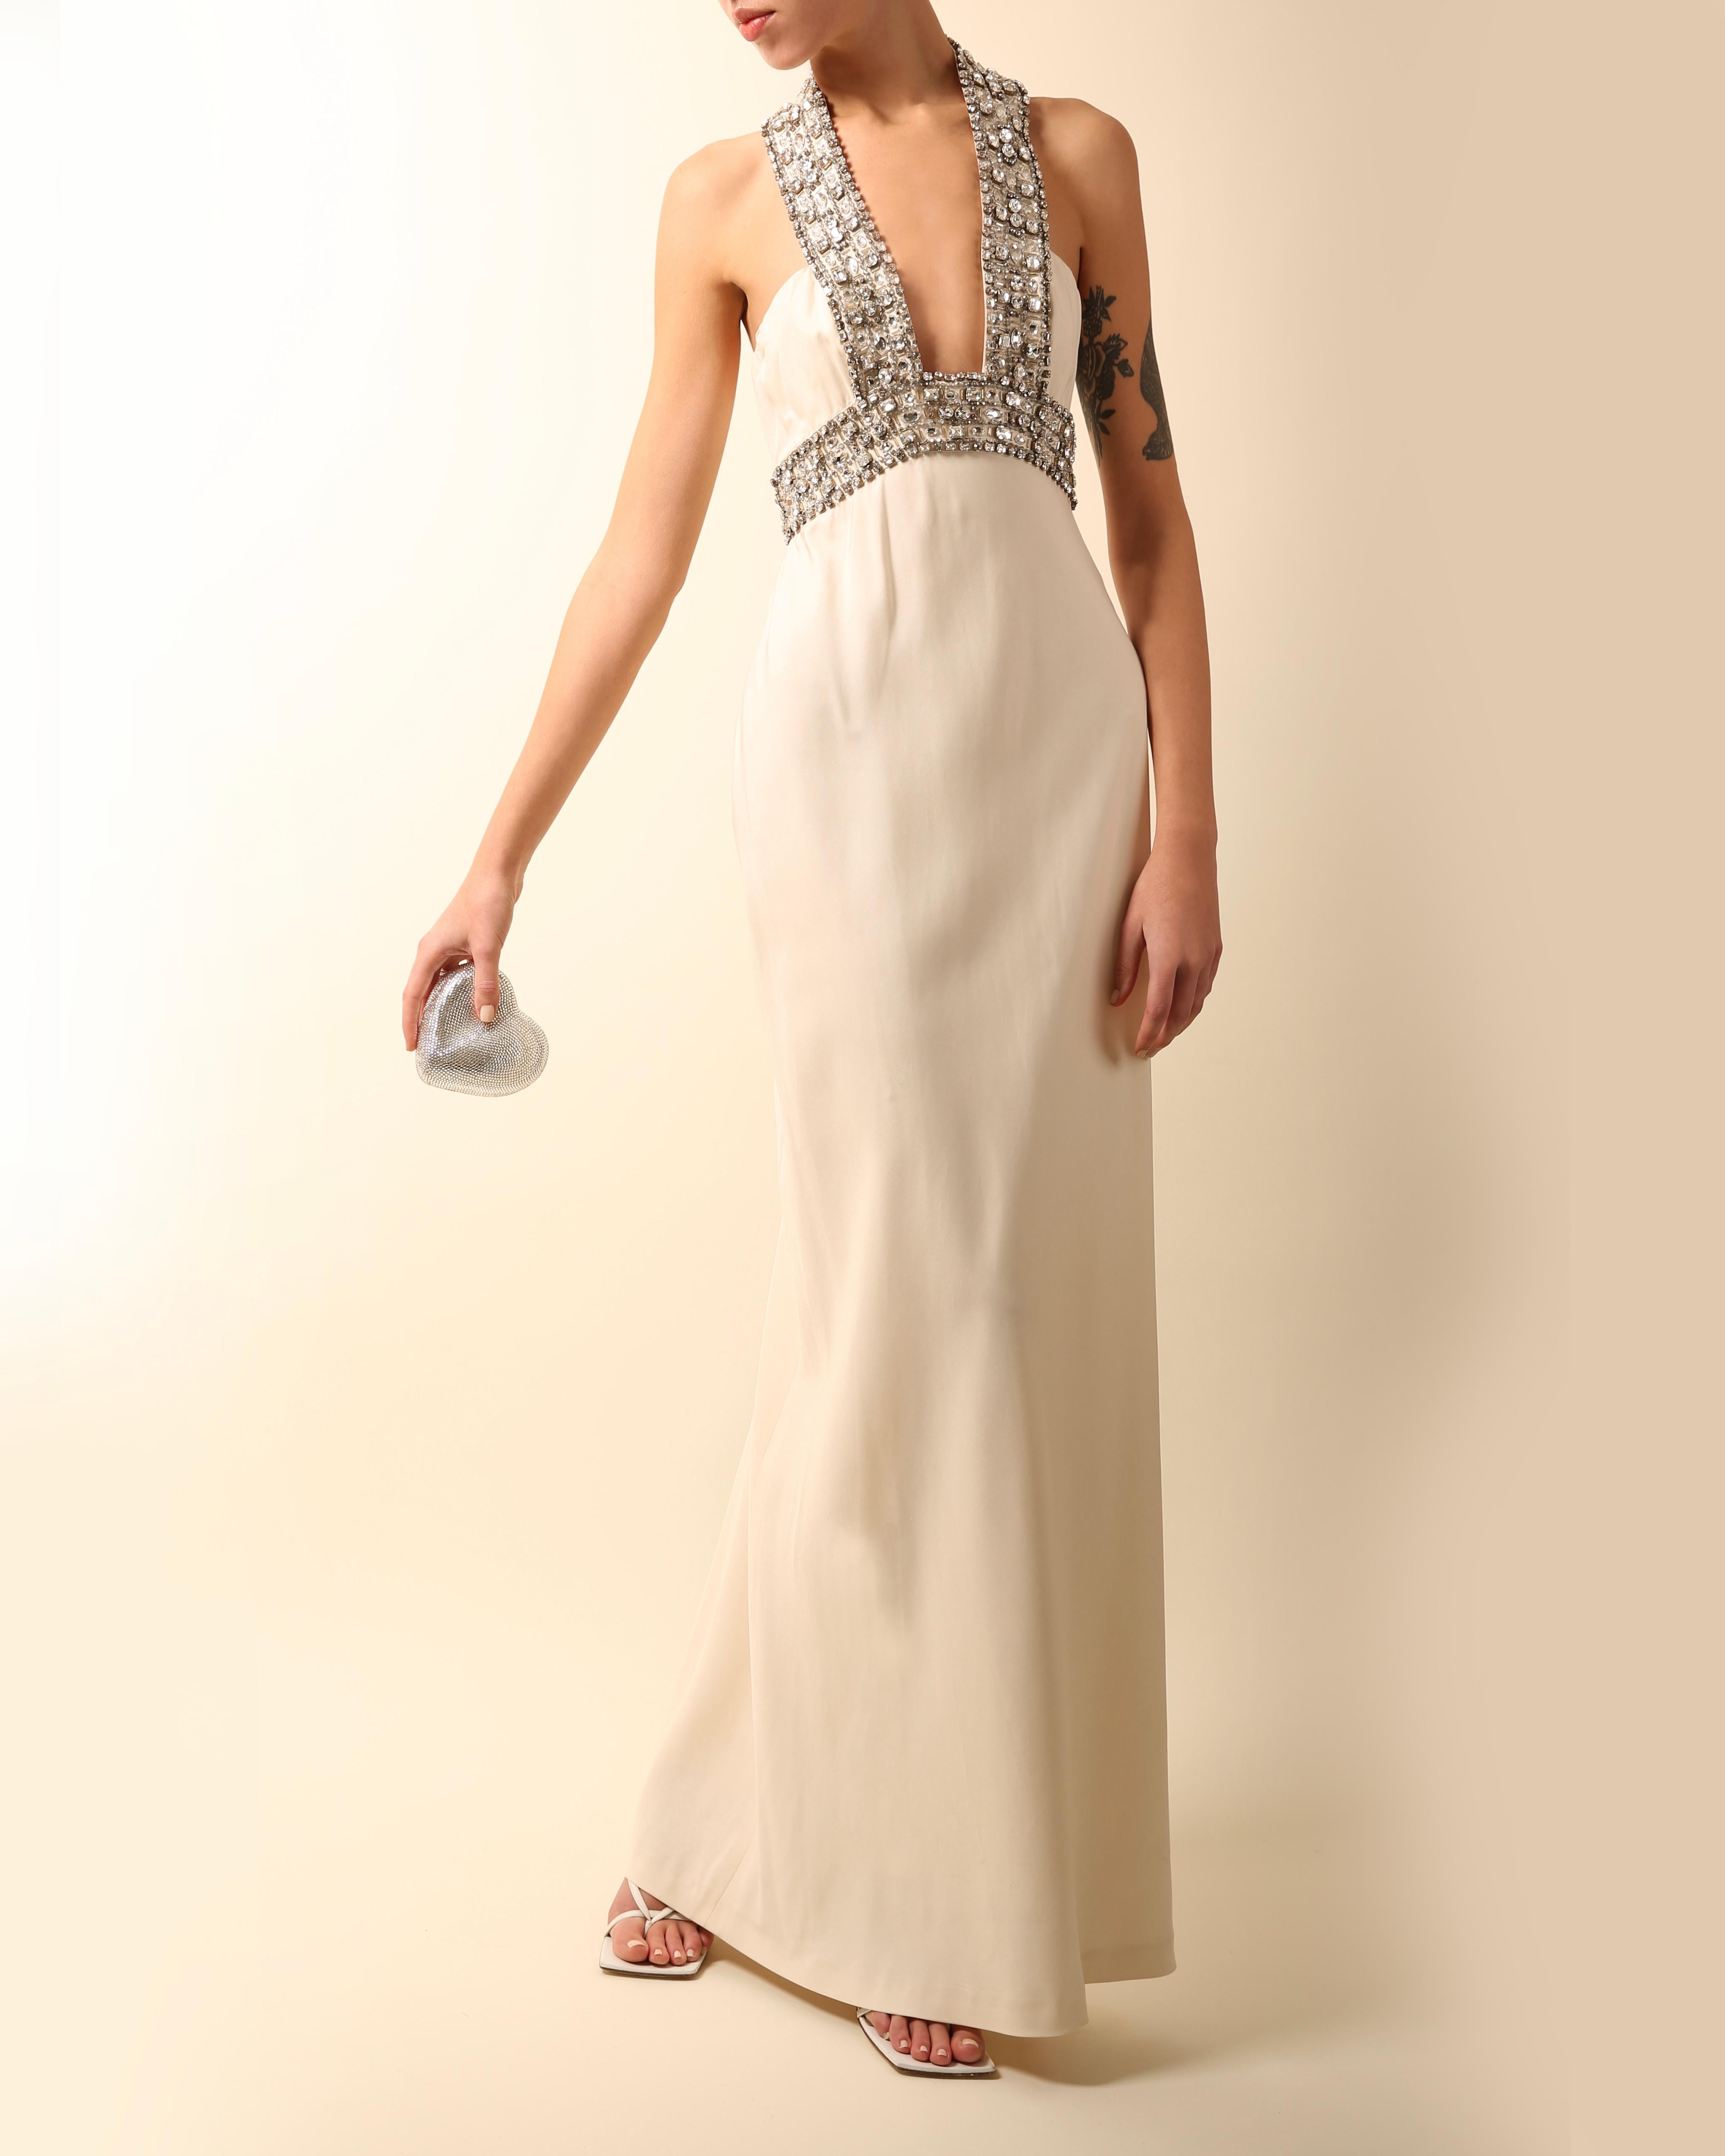 Azzaro white ivory crystal embellished low cut out halter neck dress gown 36 1